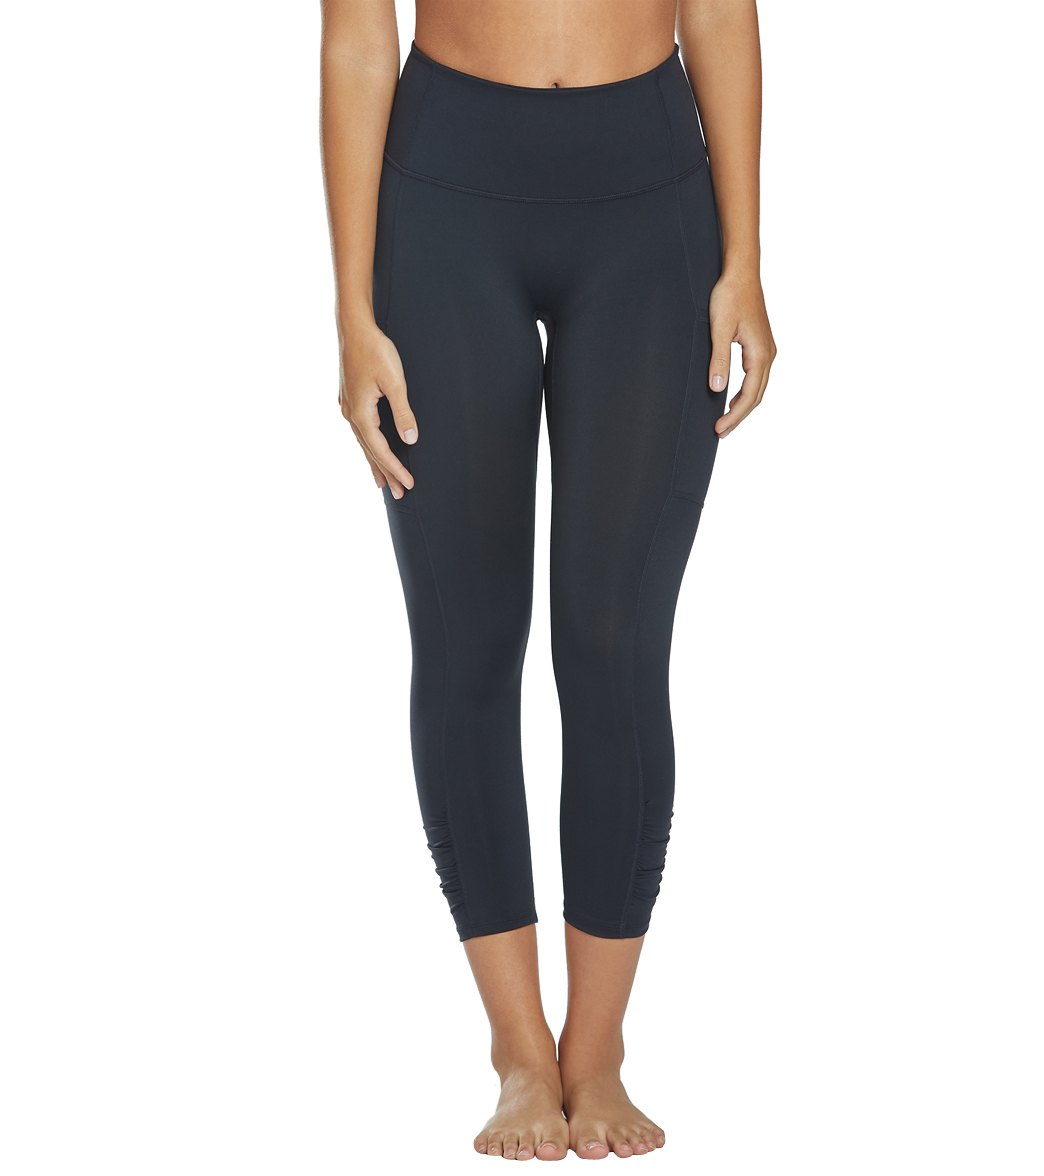 Free People Out of Your League Yoga Leggings at SwimOutlet.com - Free